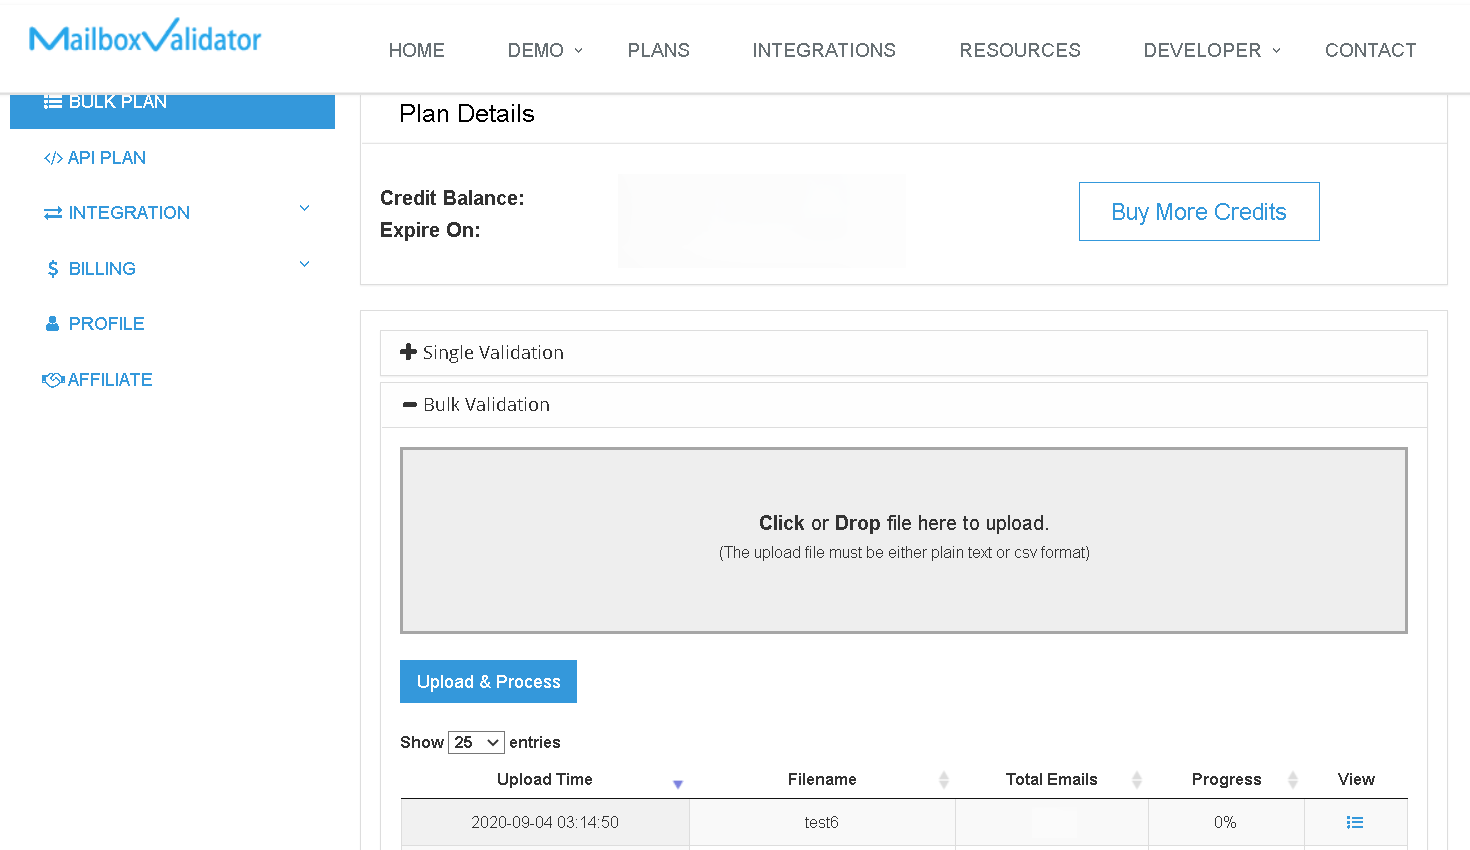 You can go to bulk plan page to check for the progress